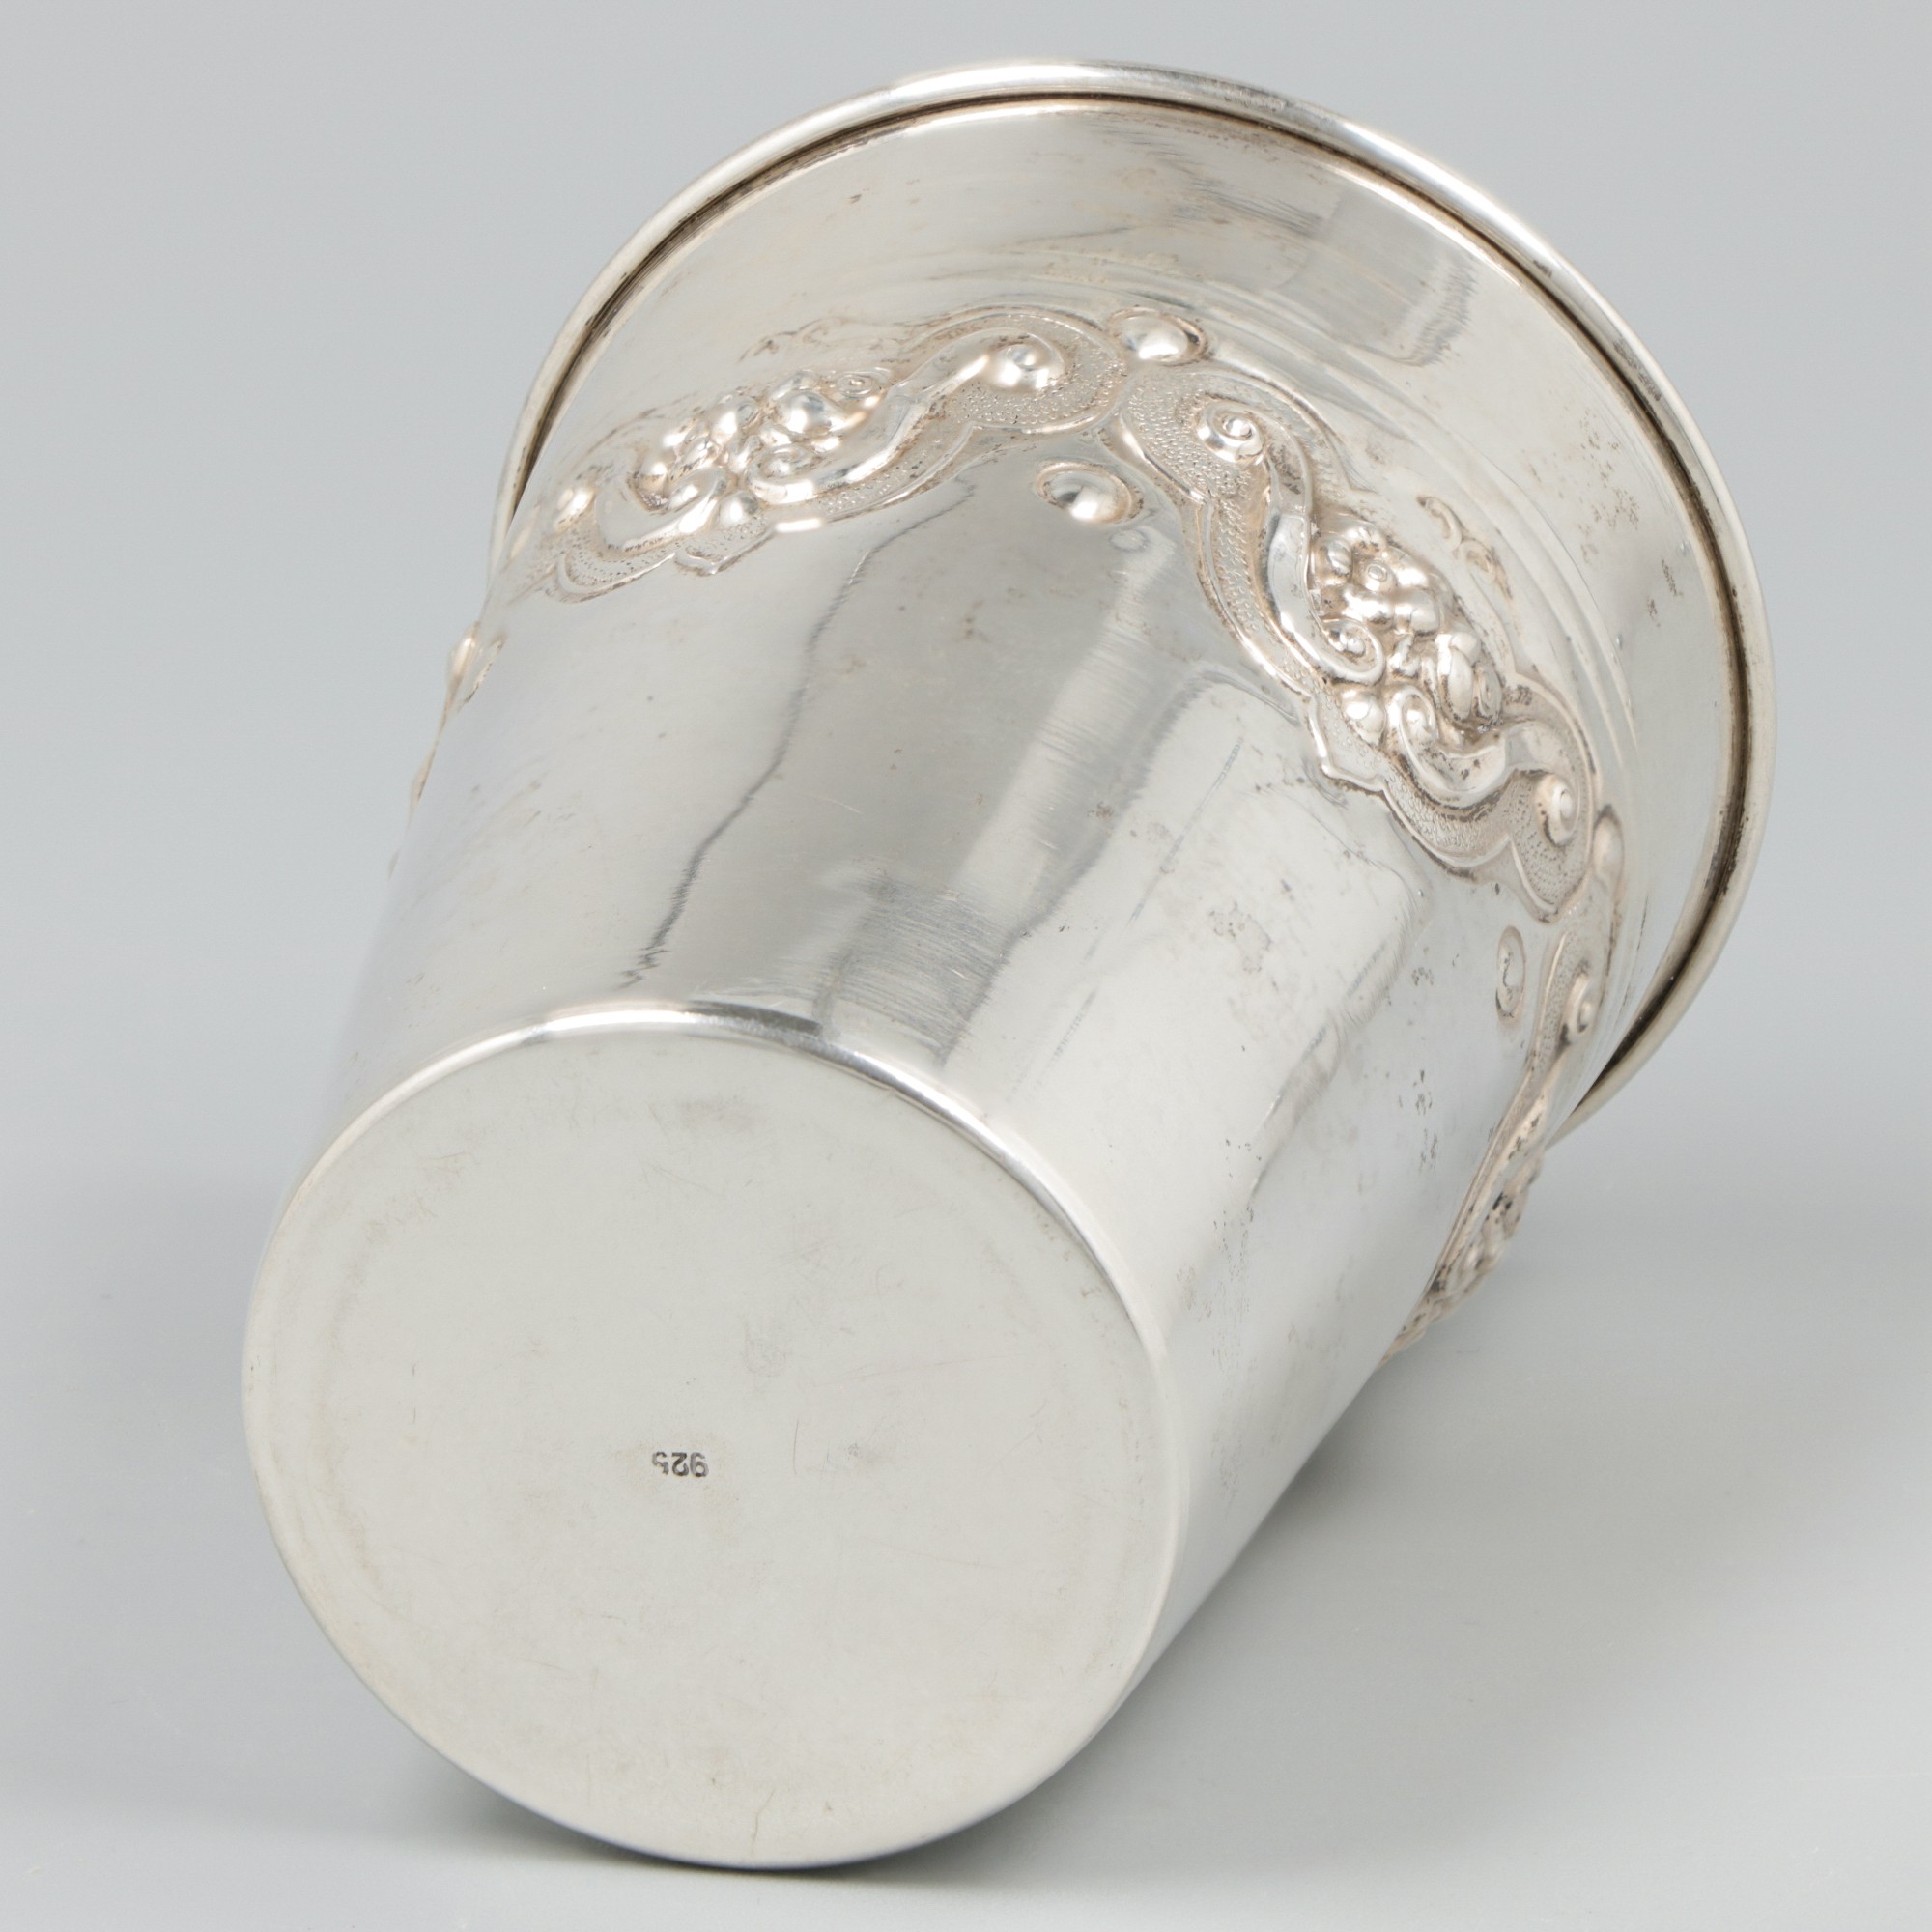 Drinking cup silver. - Image 3 of 5